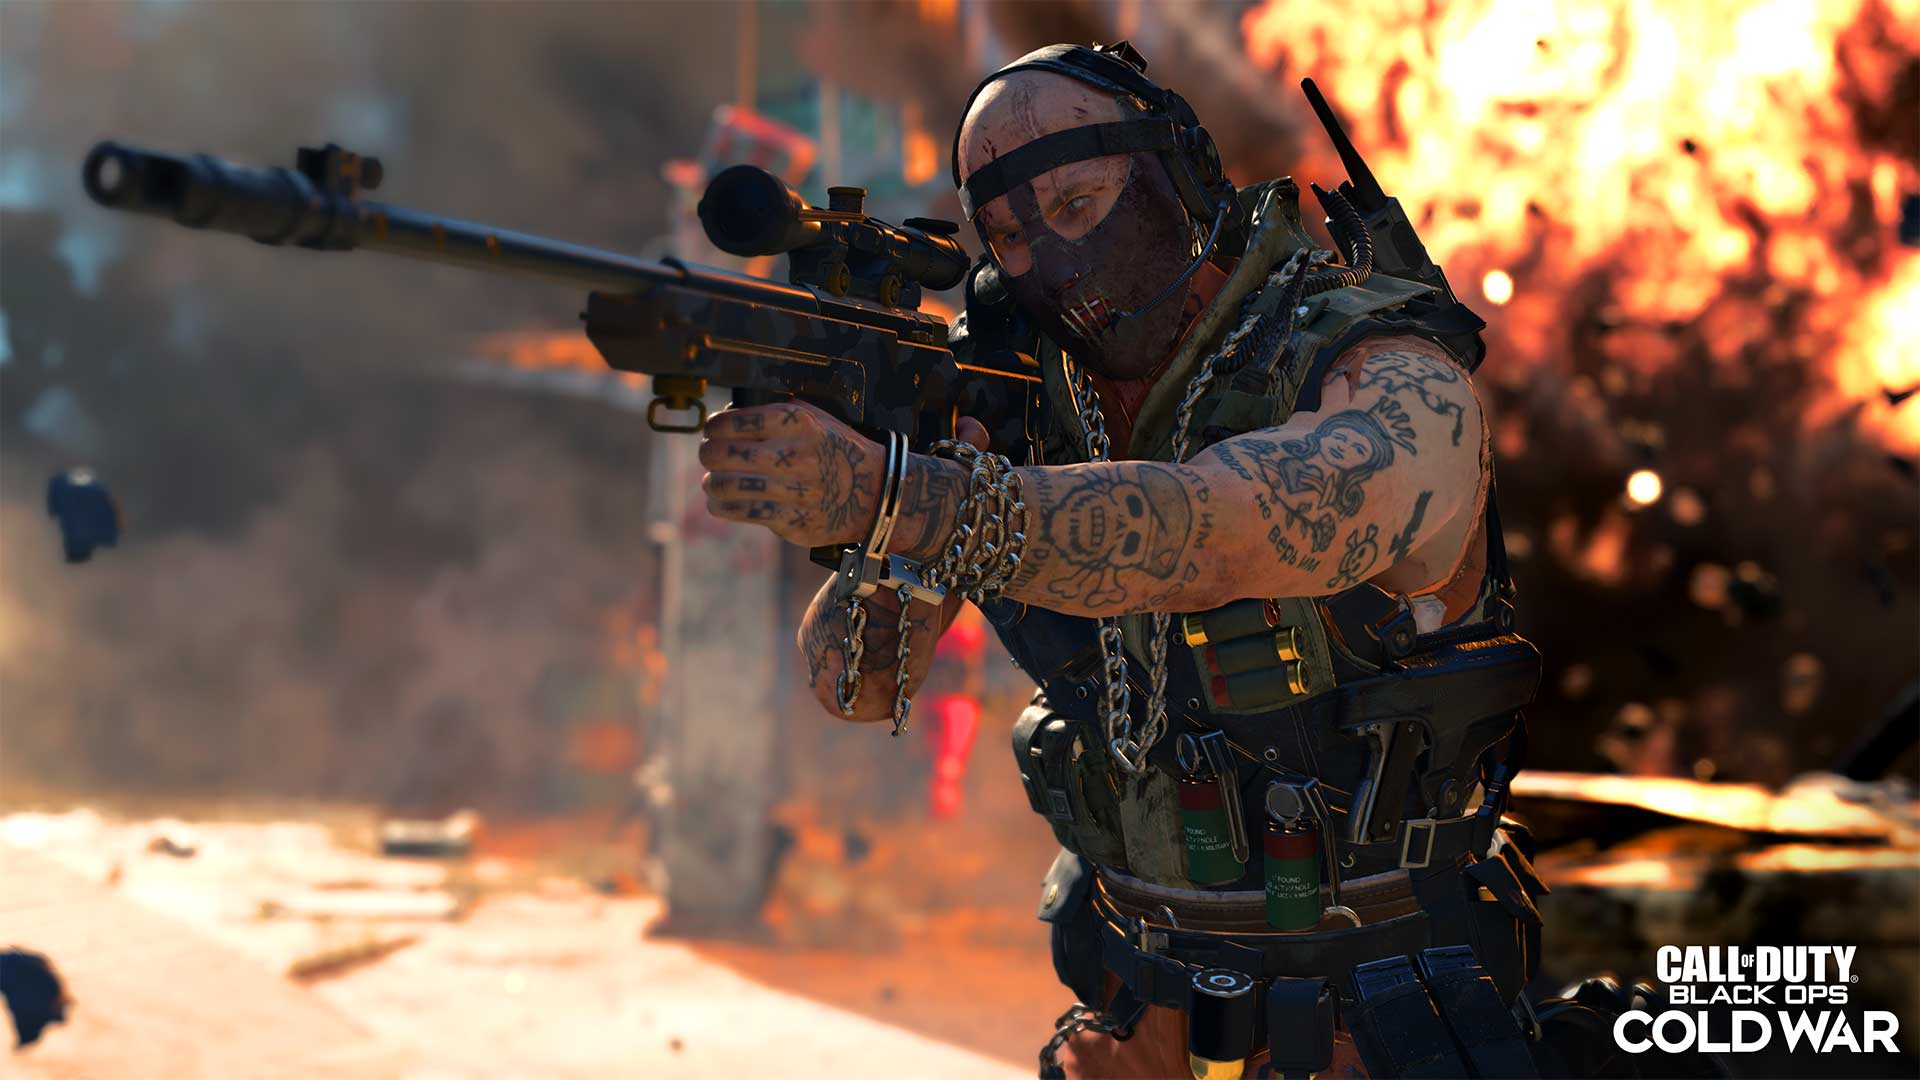 Call Of Duty: Advanced Warfare 2 might be coming in 2025, rumour claims